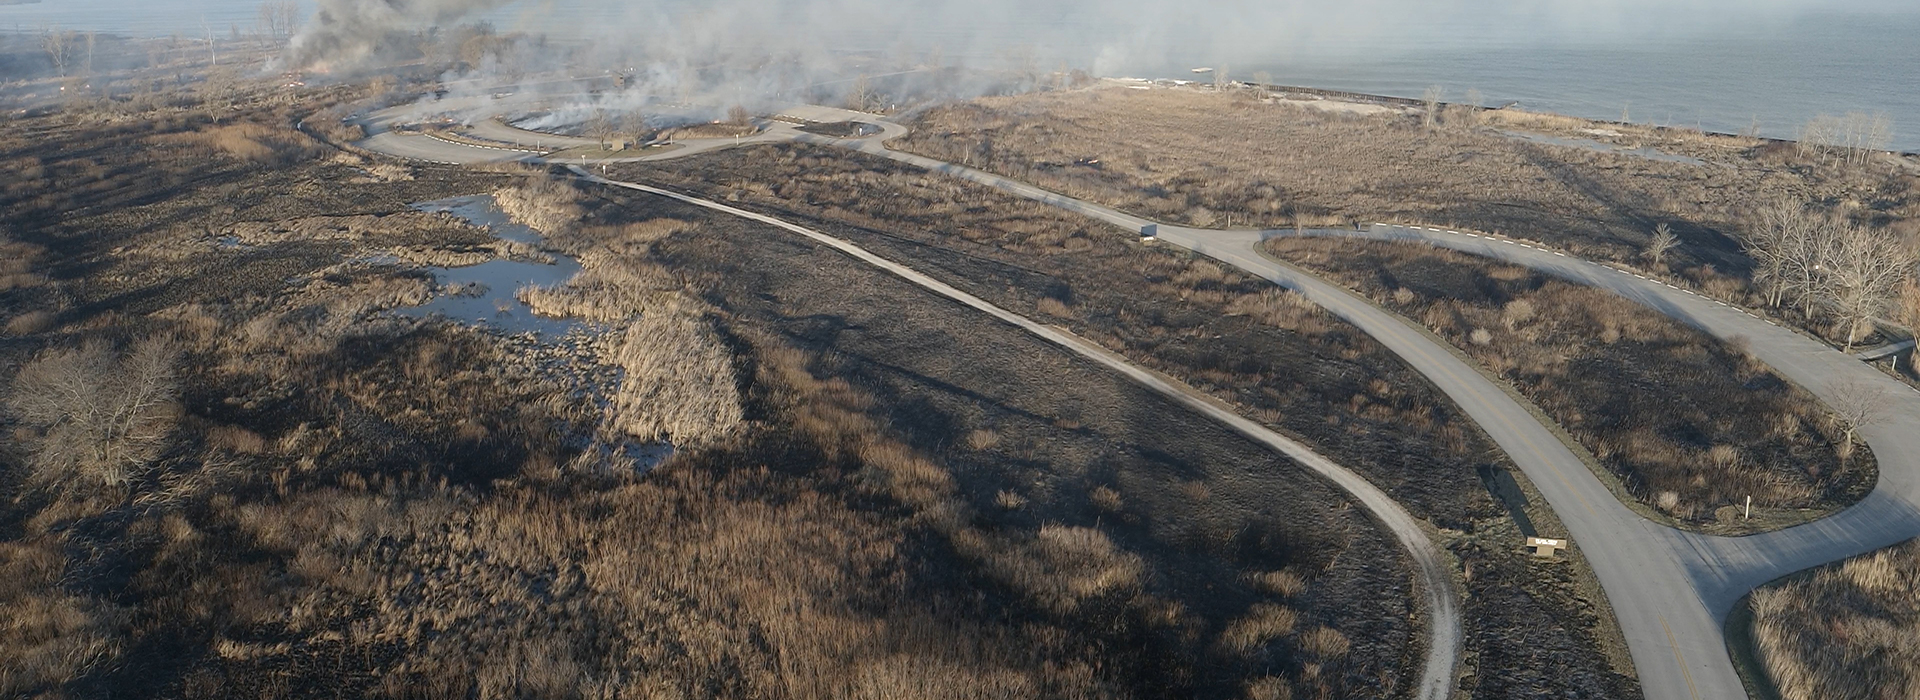 Drone Arrival at controlled fire at Illinois state park